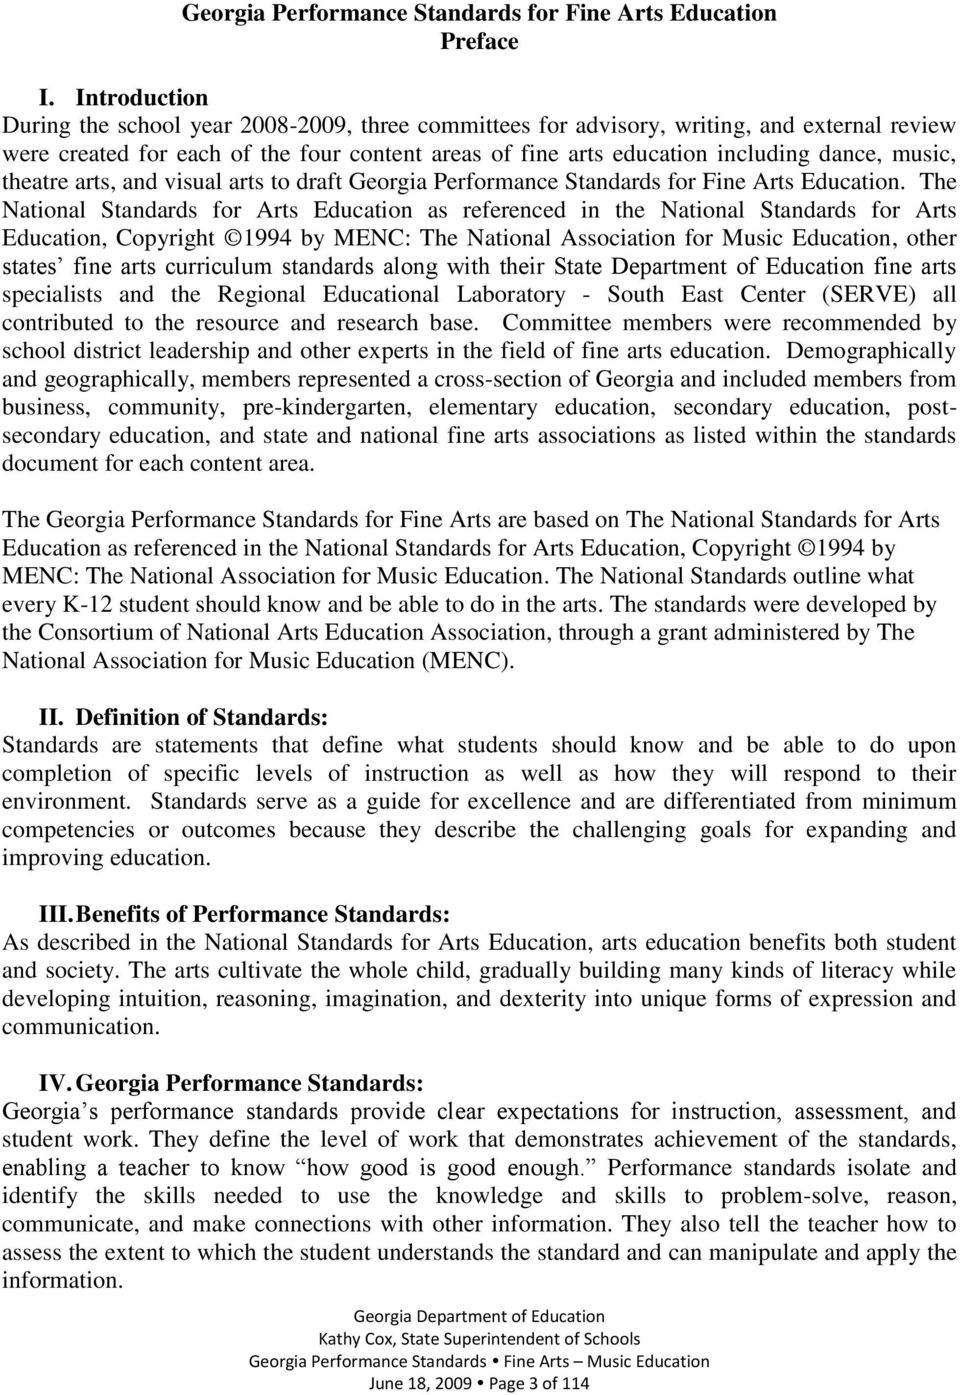 music, theatre arts, and visual arts to draft Georgia Performance Standards for Fine Arts Education.